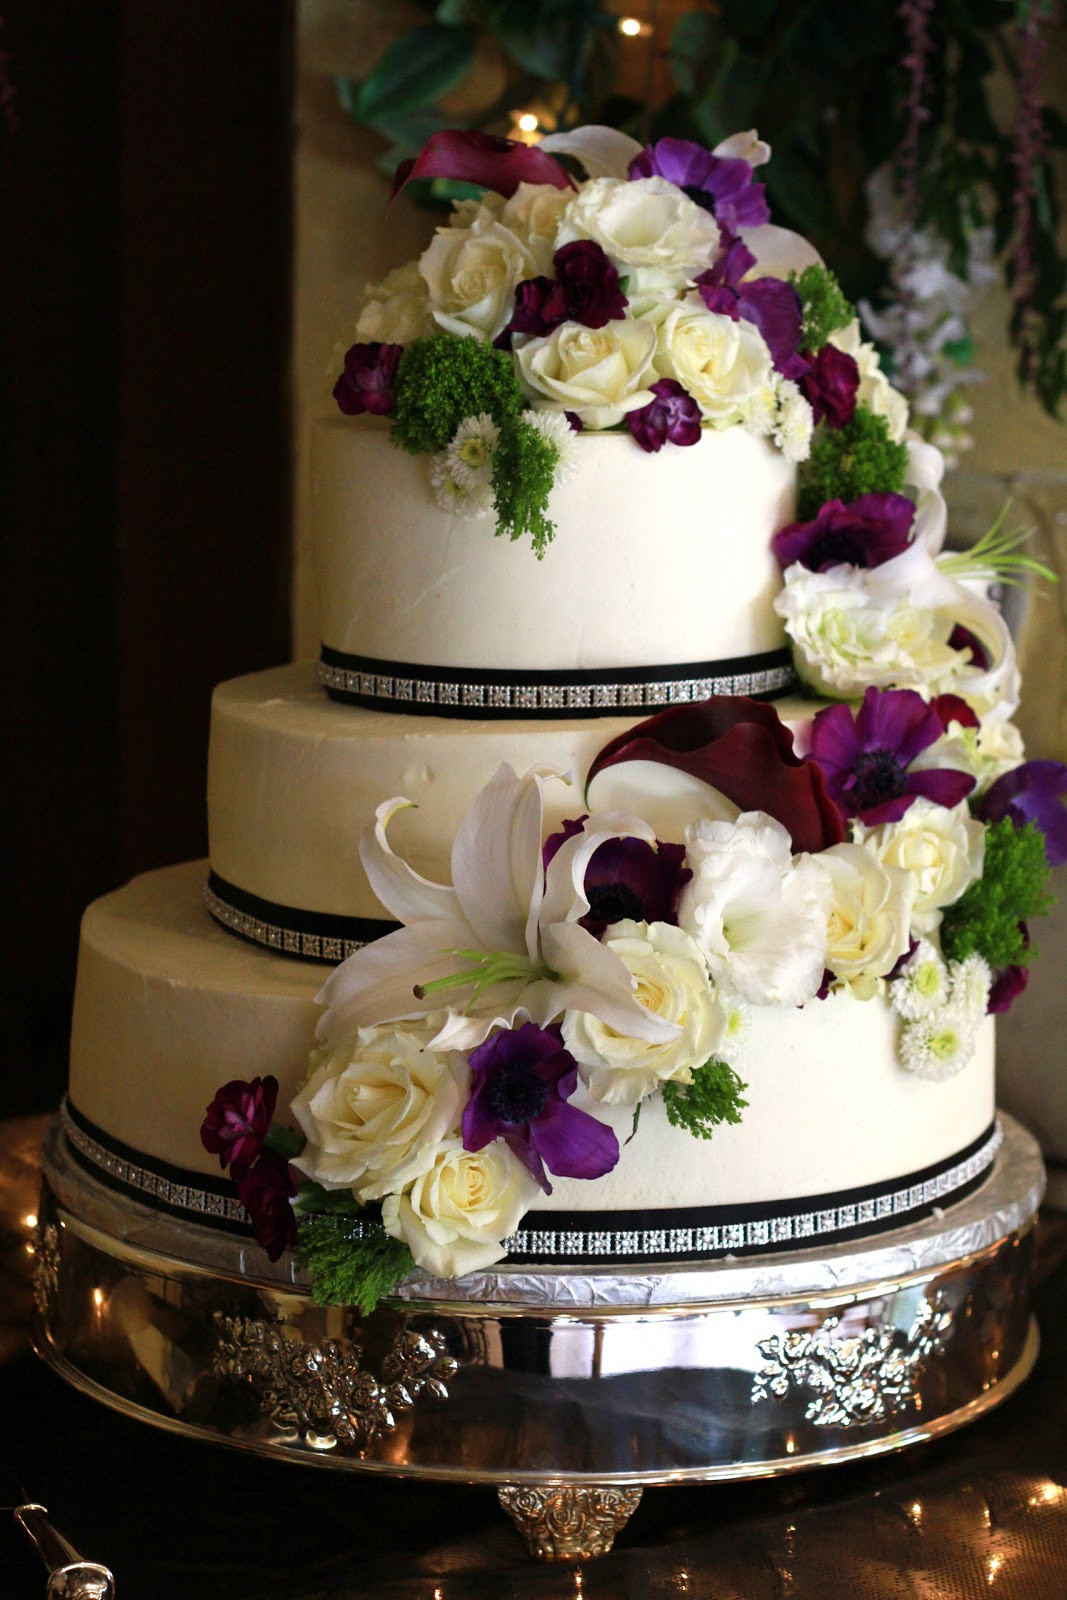 How To Decorate A Wedding Cake
 Exquisite Cookies 3 Tier wedding cake with fresh flowers